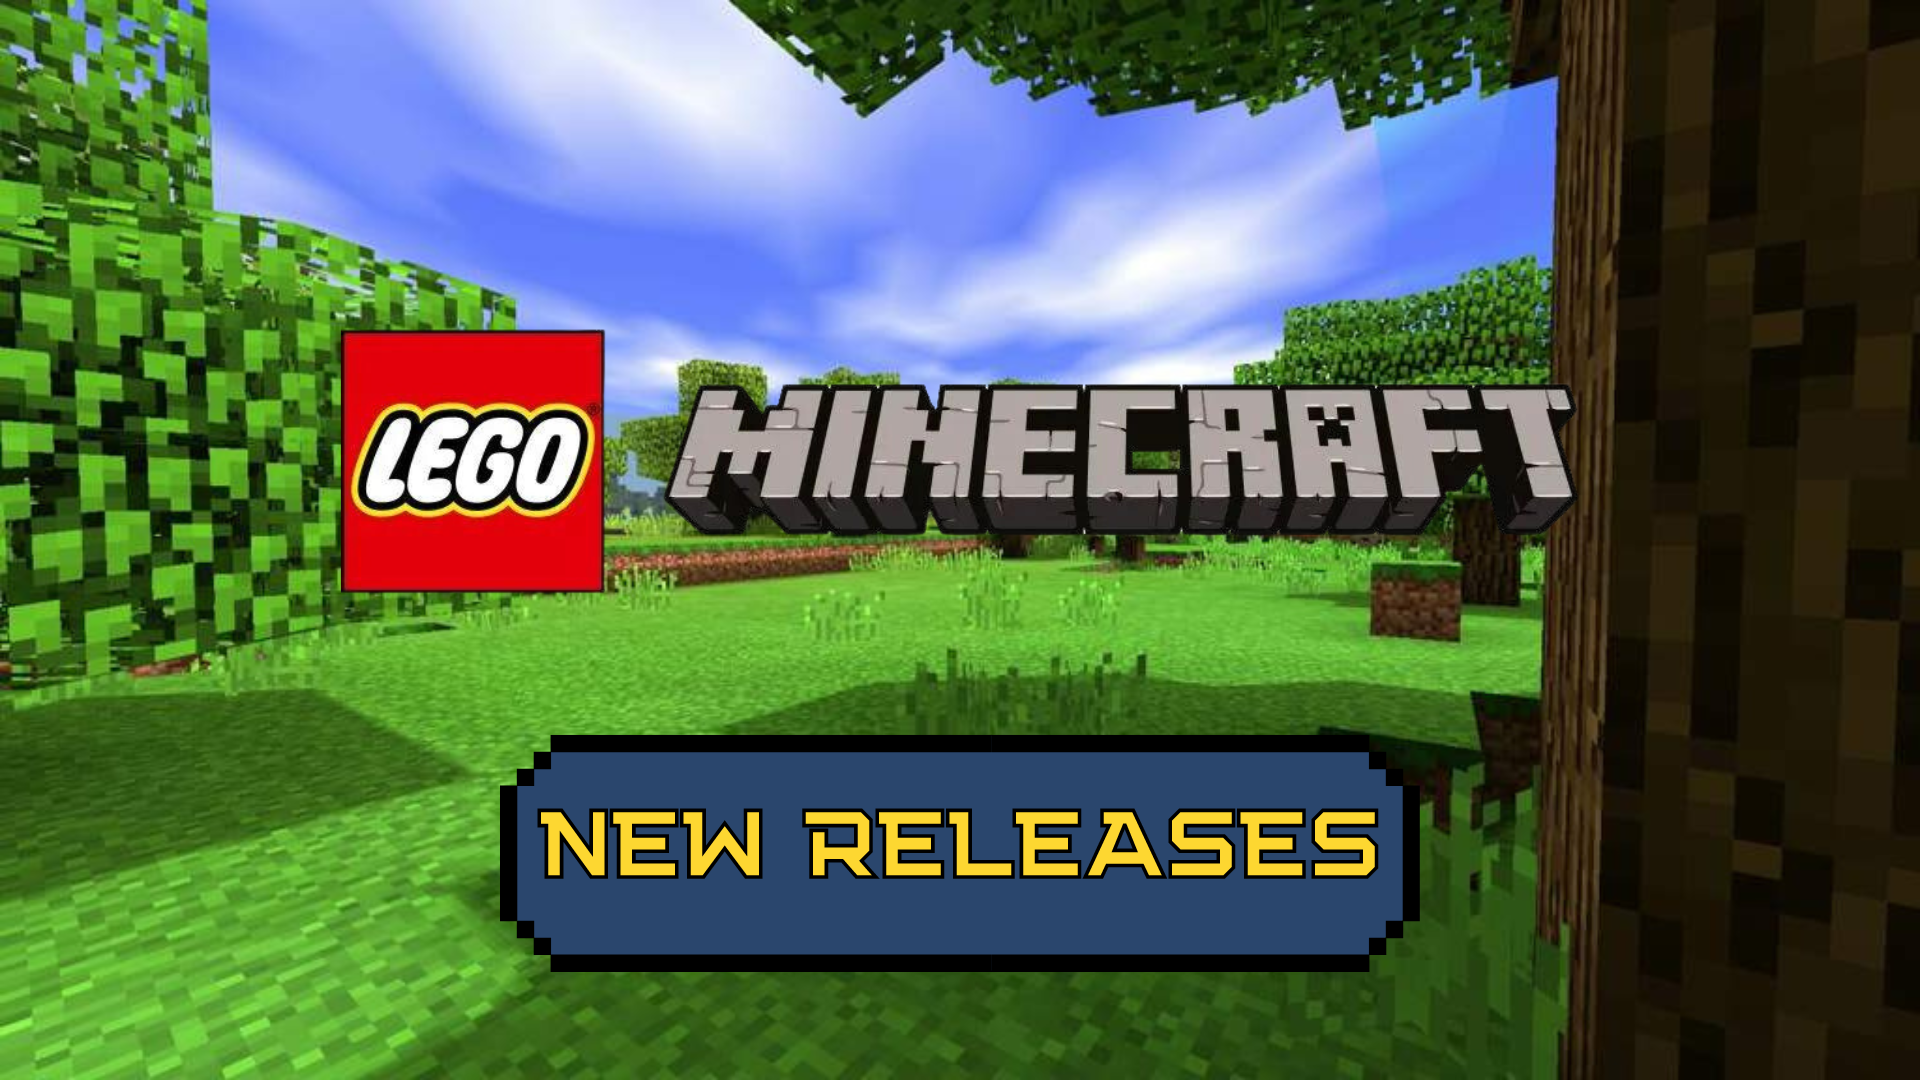 New LEGO Minecraft Sets - The Brick Stand